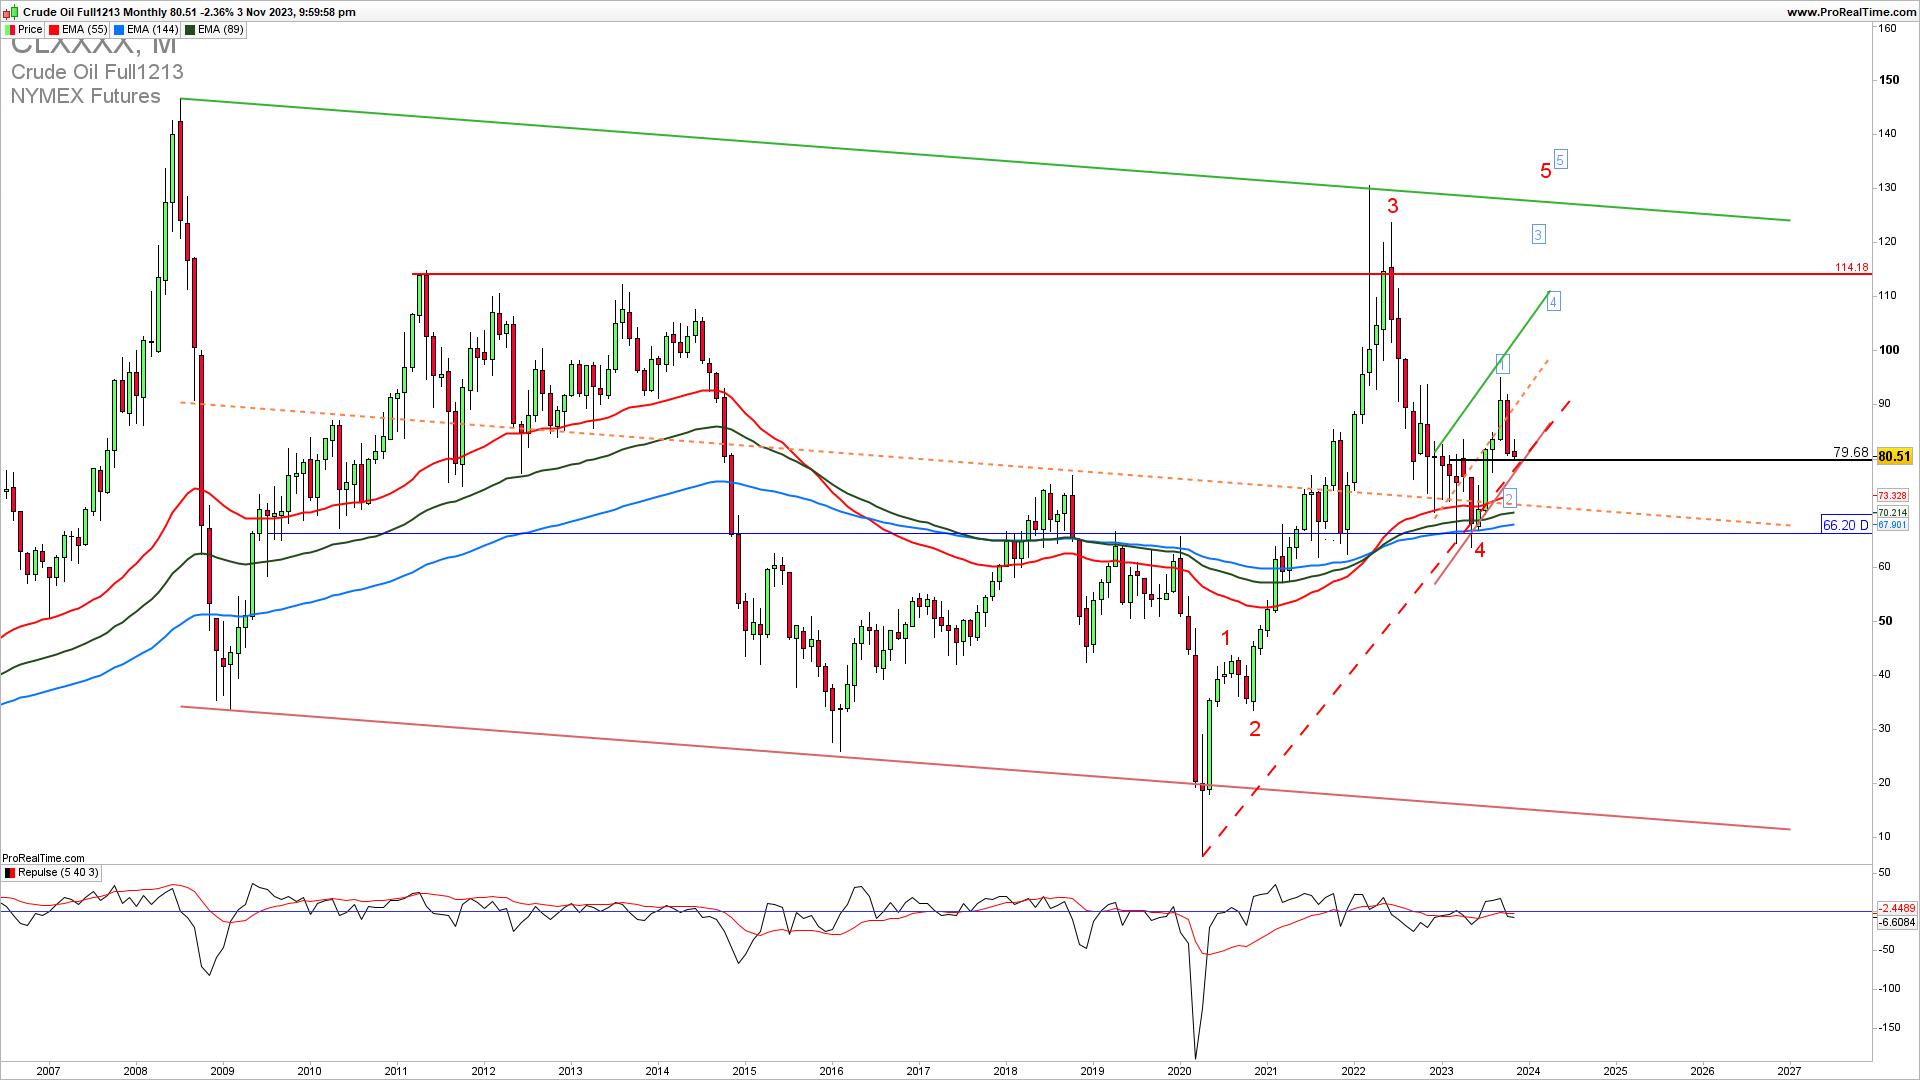 WTI Oil monthly chart